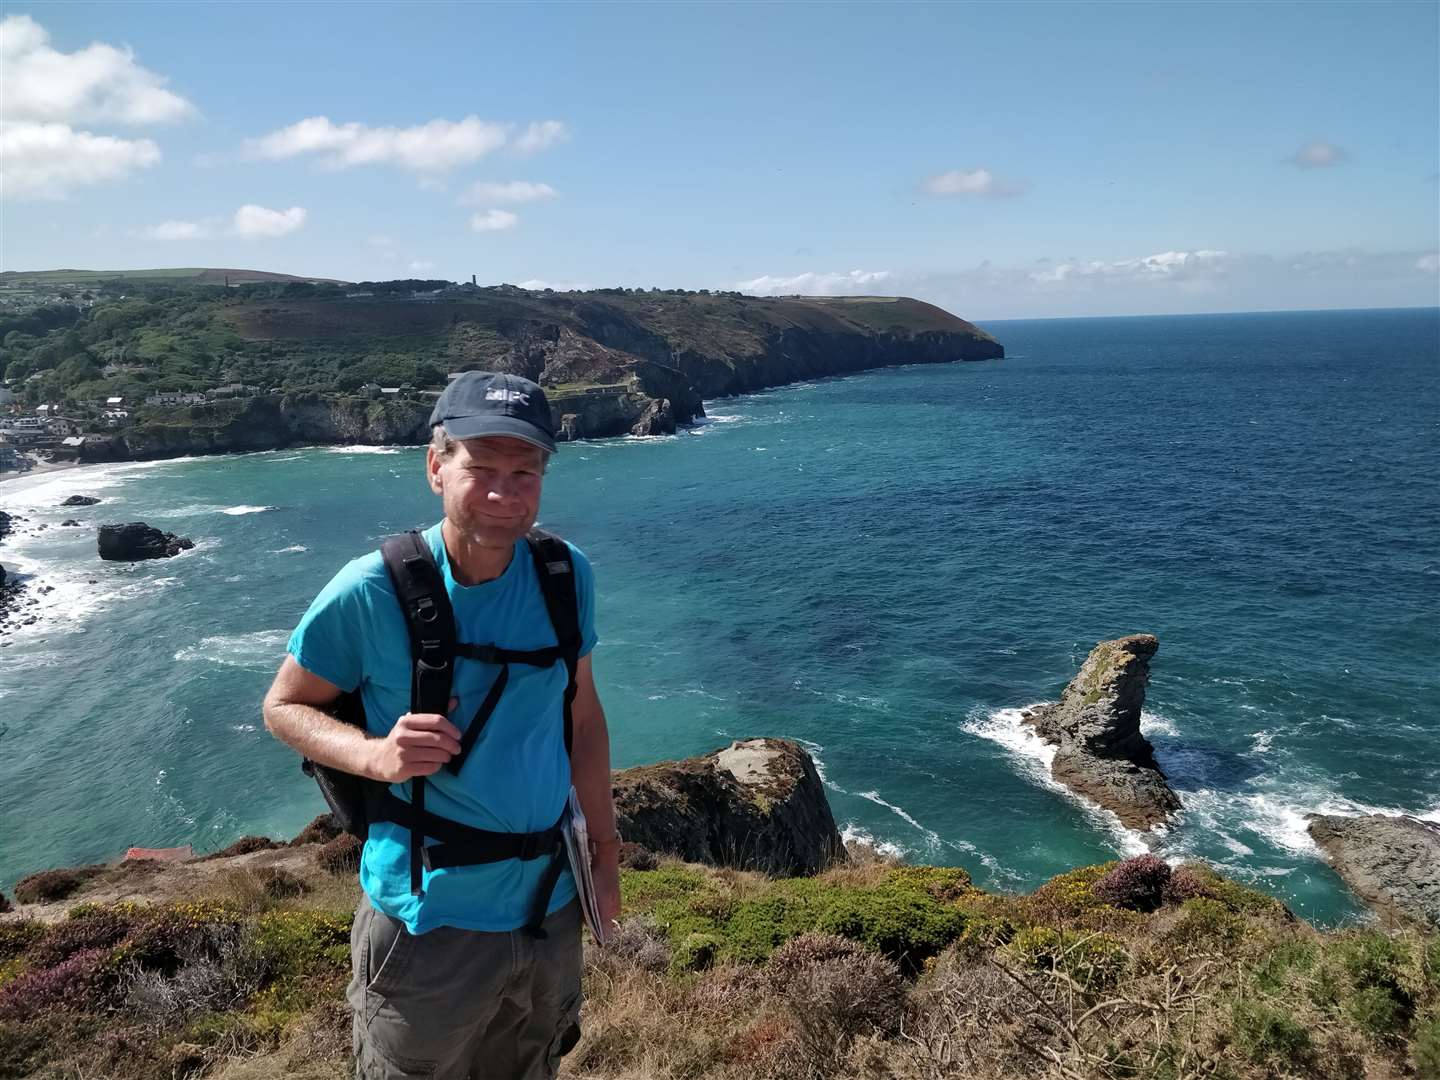 Laurence has spent the last year walking around the English and Welsh coastlines